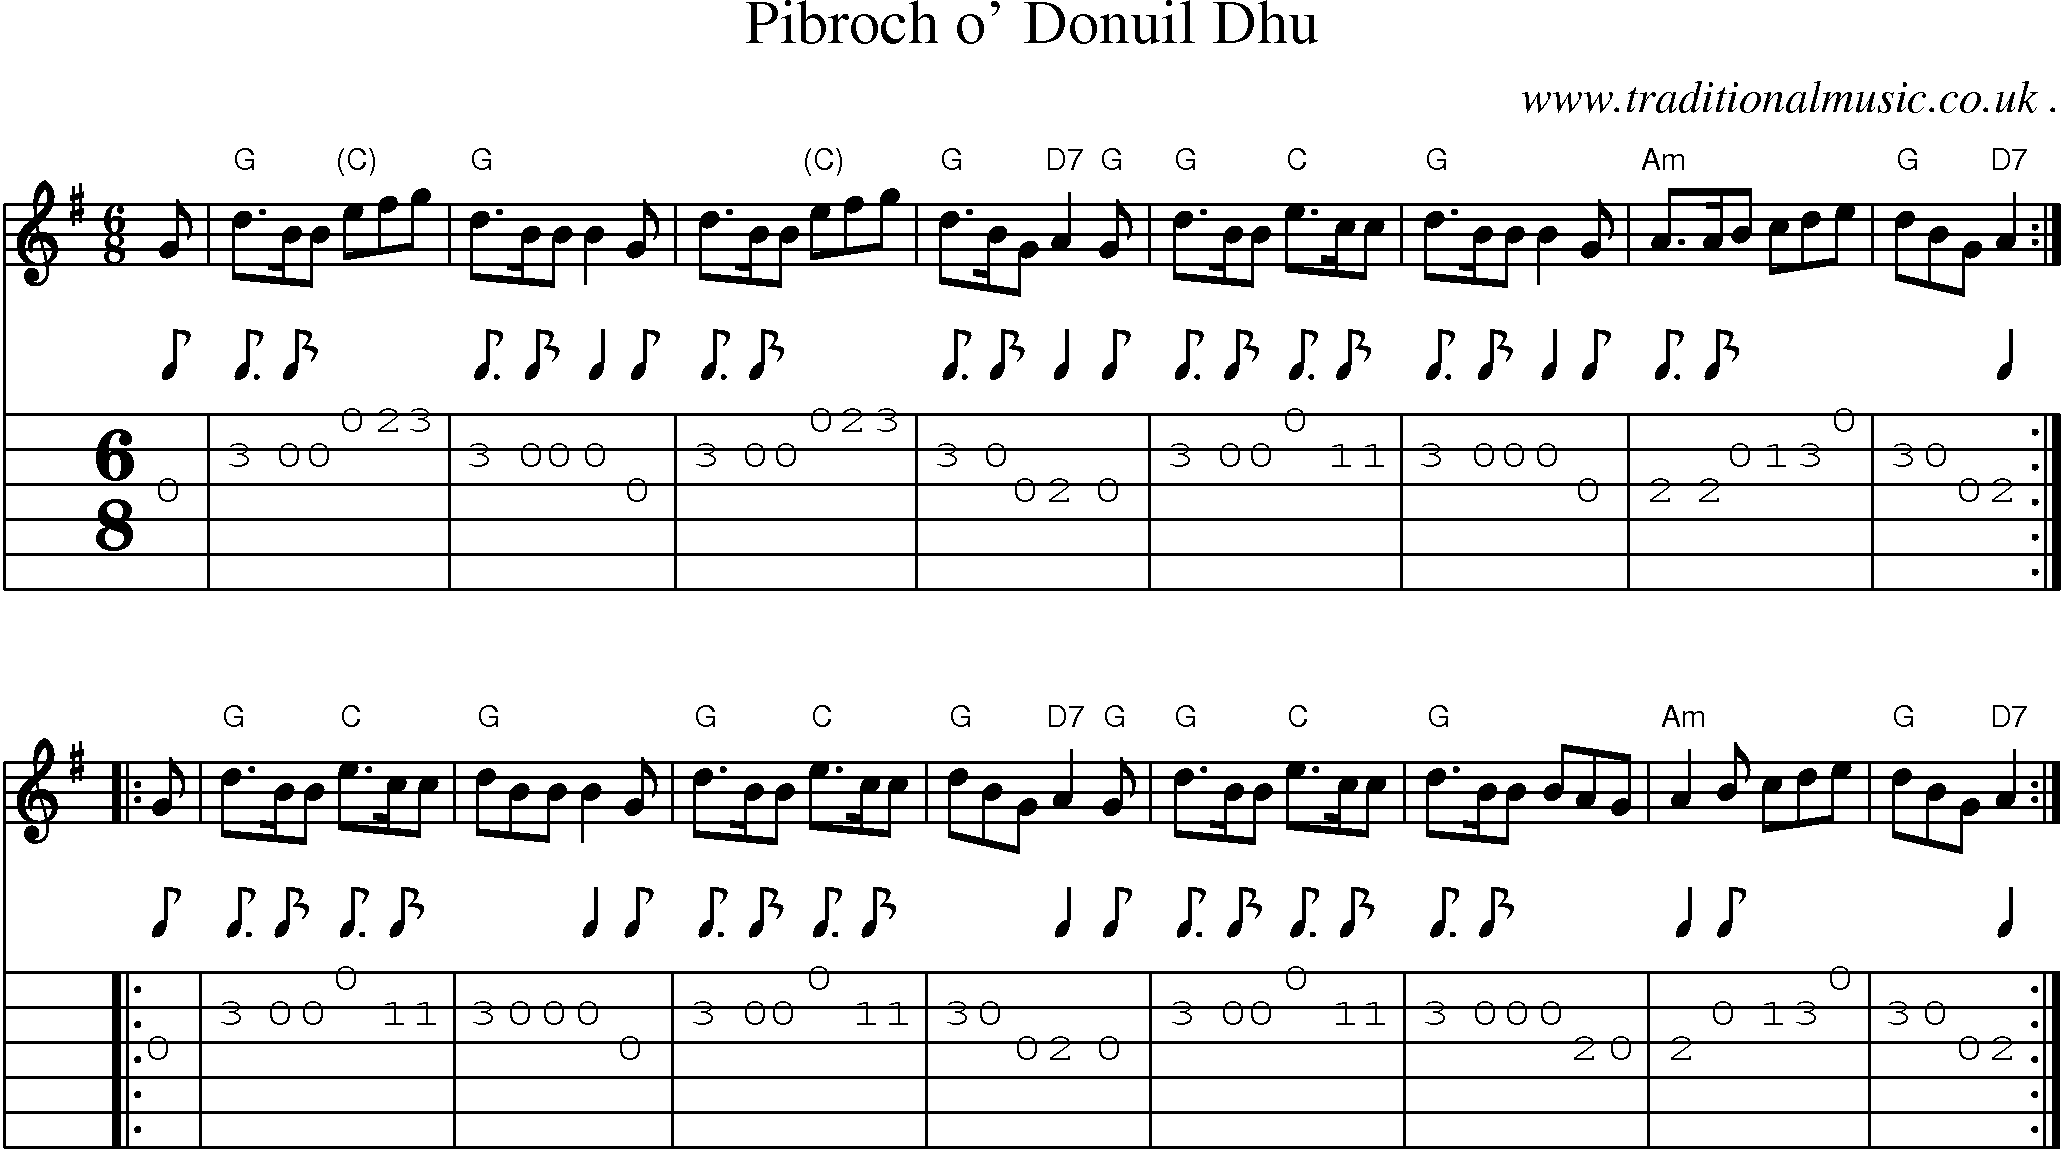 Sheet-music  score, Chords and Guitar Tabs for Pibroch O Donuil Dhu